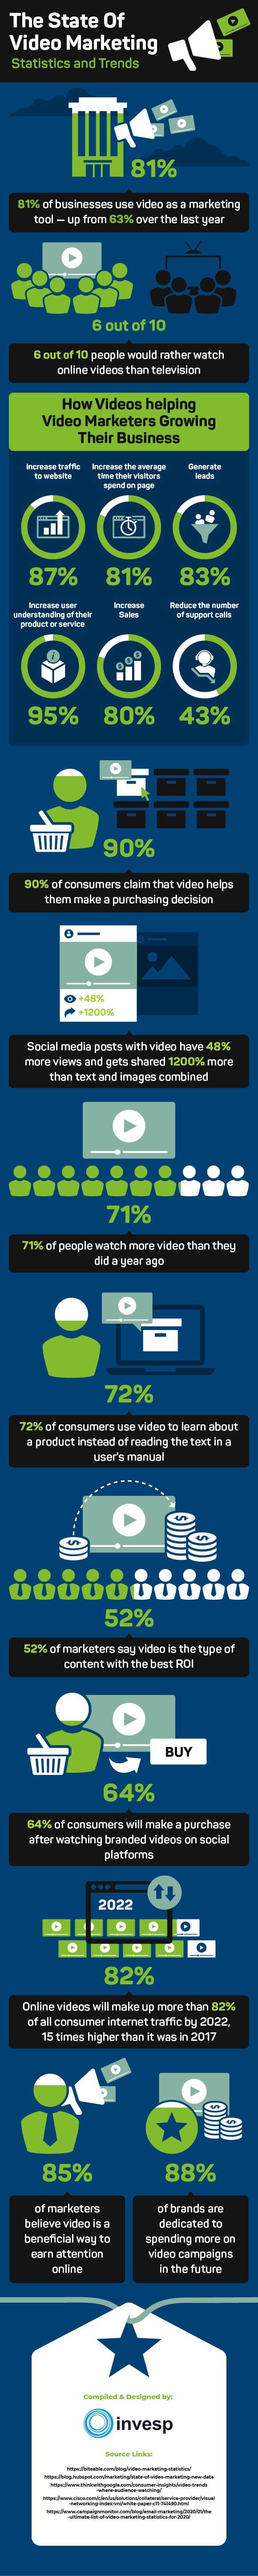 The State of Video Marketing – Statistics and Trends